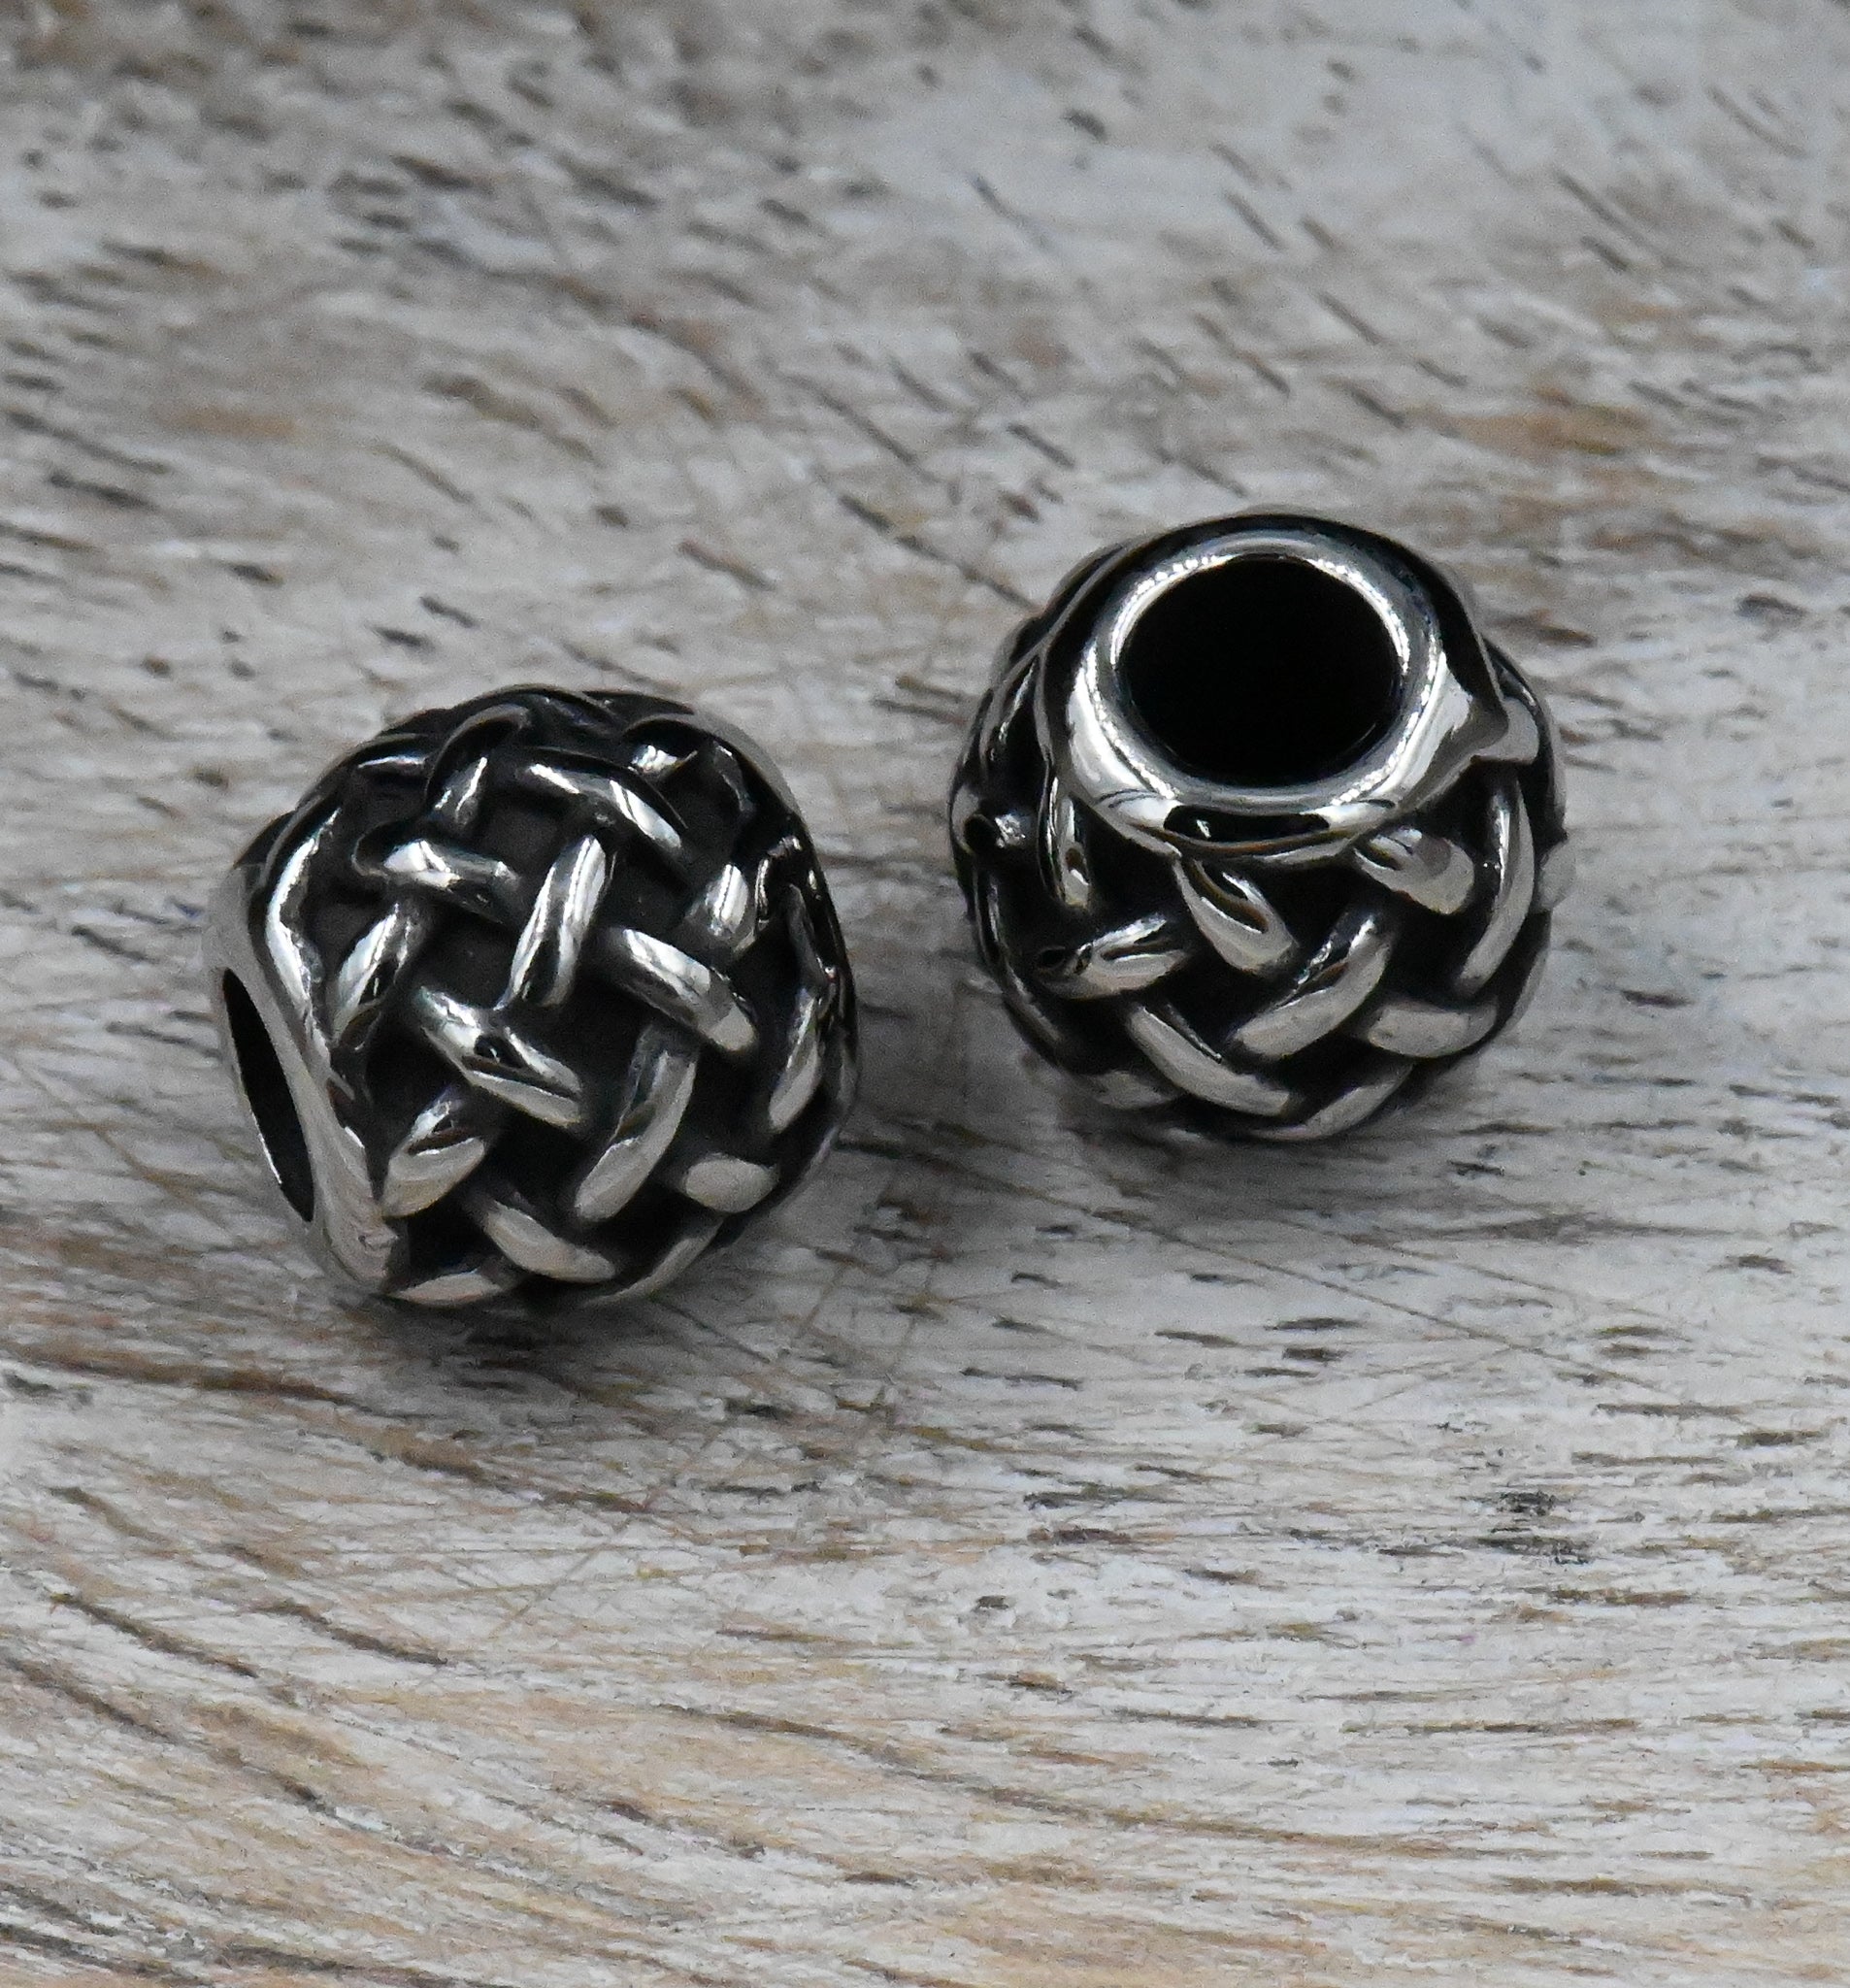 Stainless Steel Beads, 1pc, Weave Pattern Large Hole Beads, Column, 10mm Antique Silver